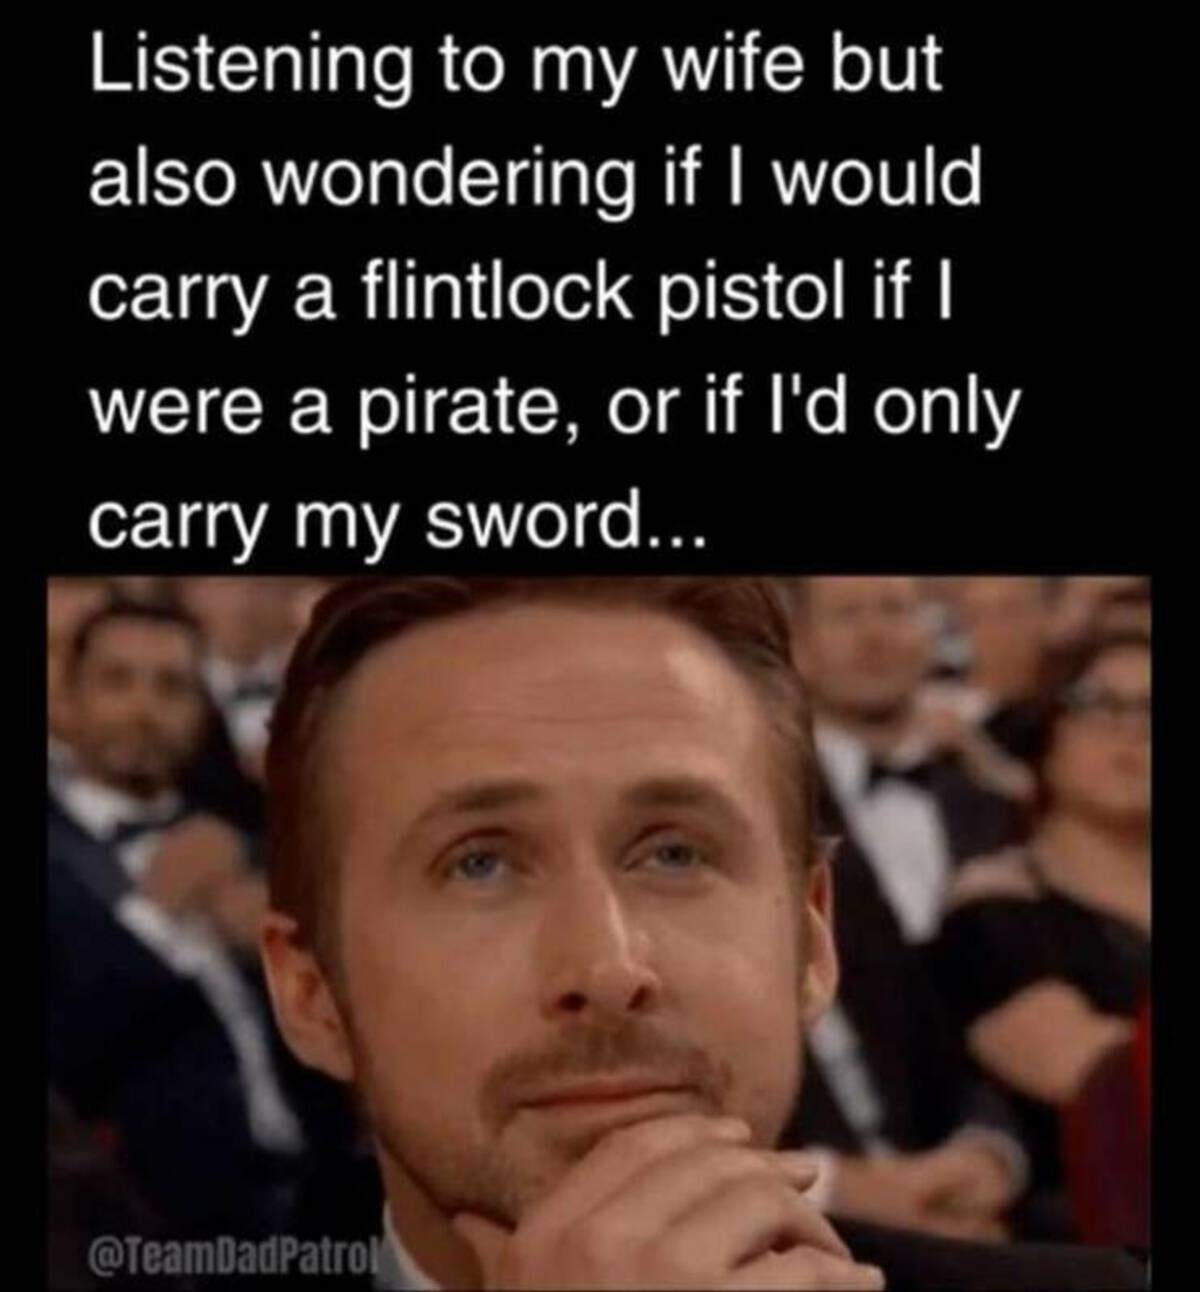 photo caption - Listening to my wife but also wondering if I would carry a flintlock pistol if I were a pirate, or if I'd only carry my sword...